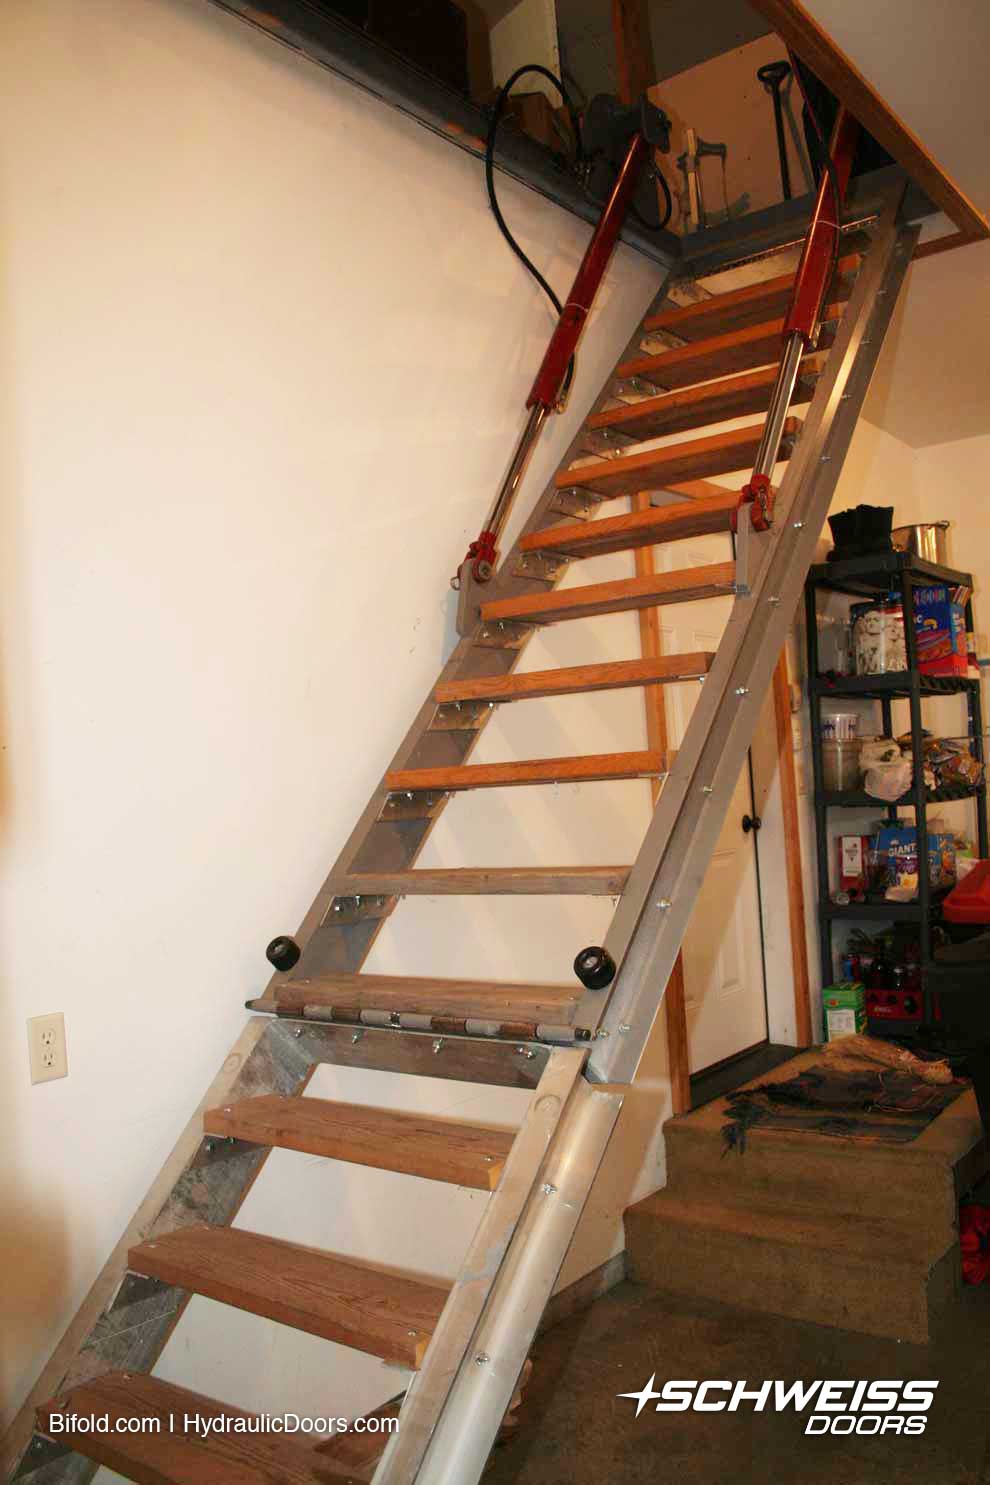 hydraulic staircase is 3' wide by 10.4 feet long